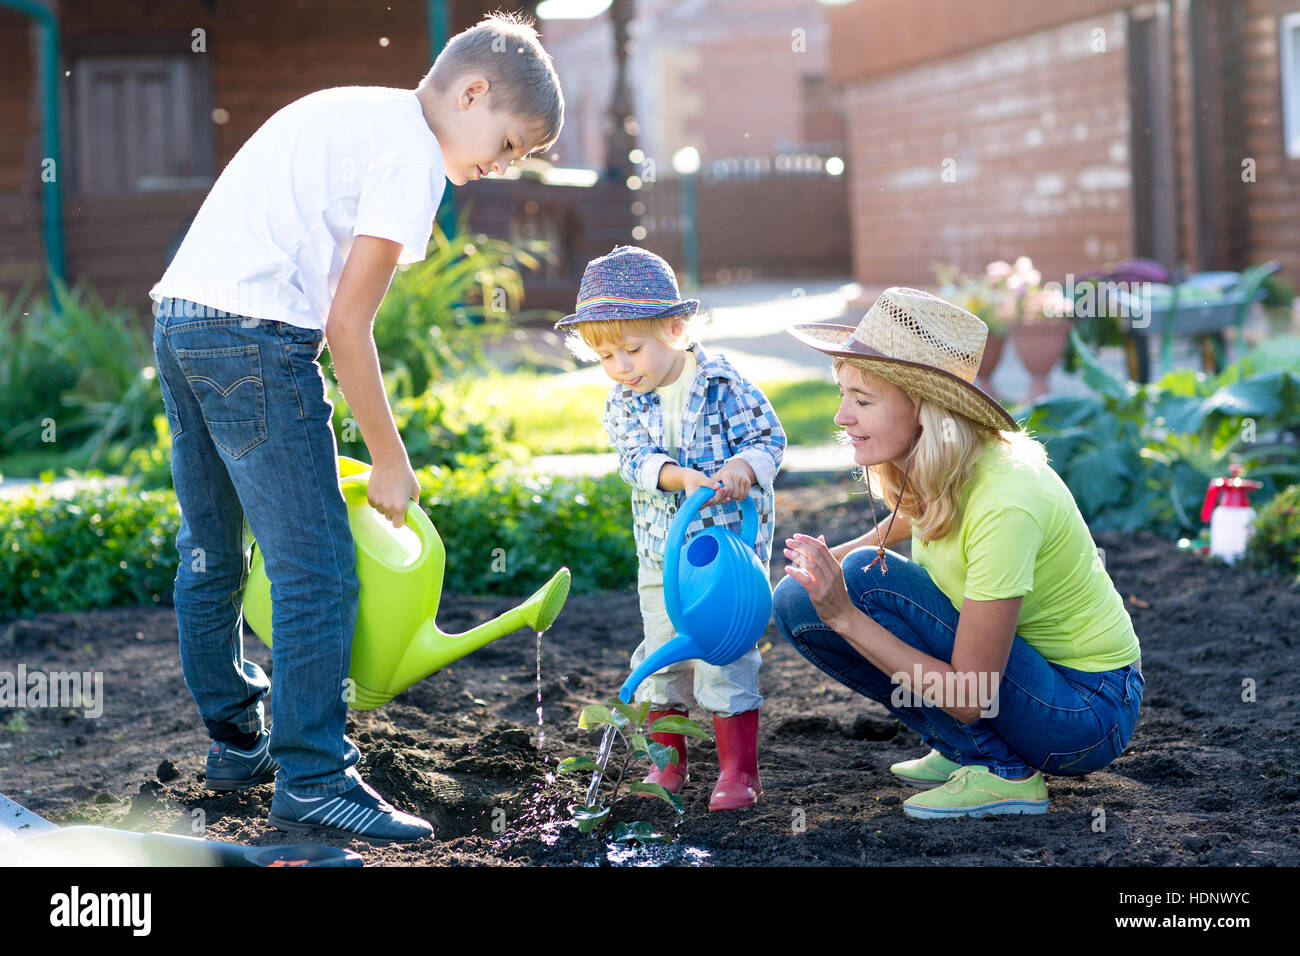 Mother with two children sons planting a tree and watering it together in garden Stock Photo